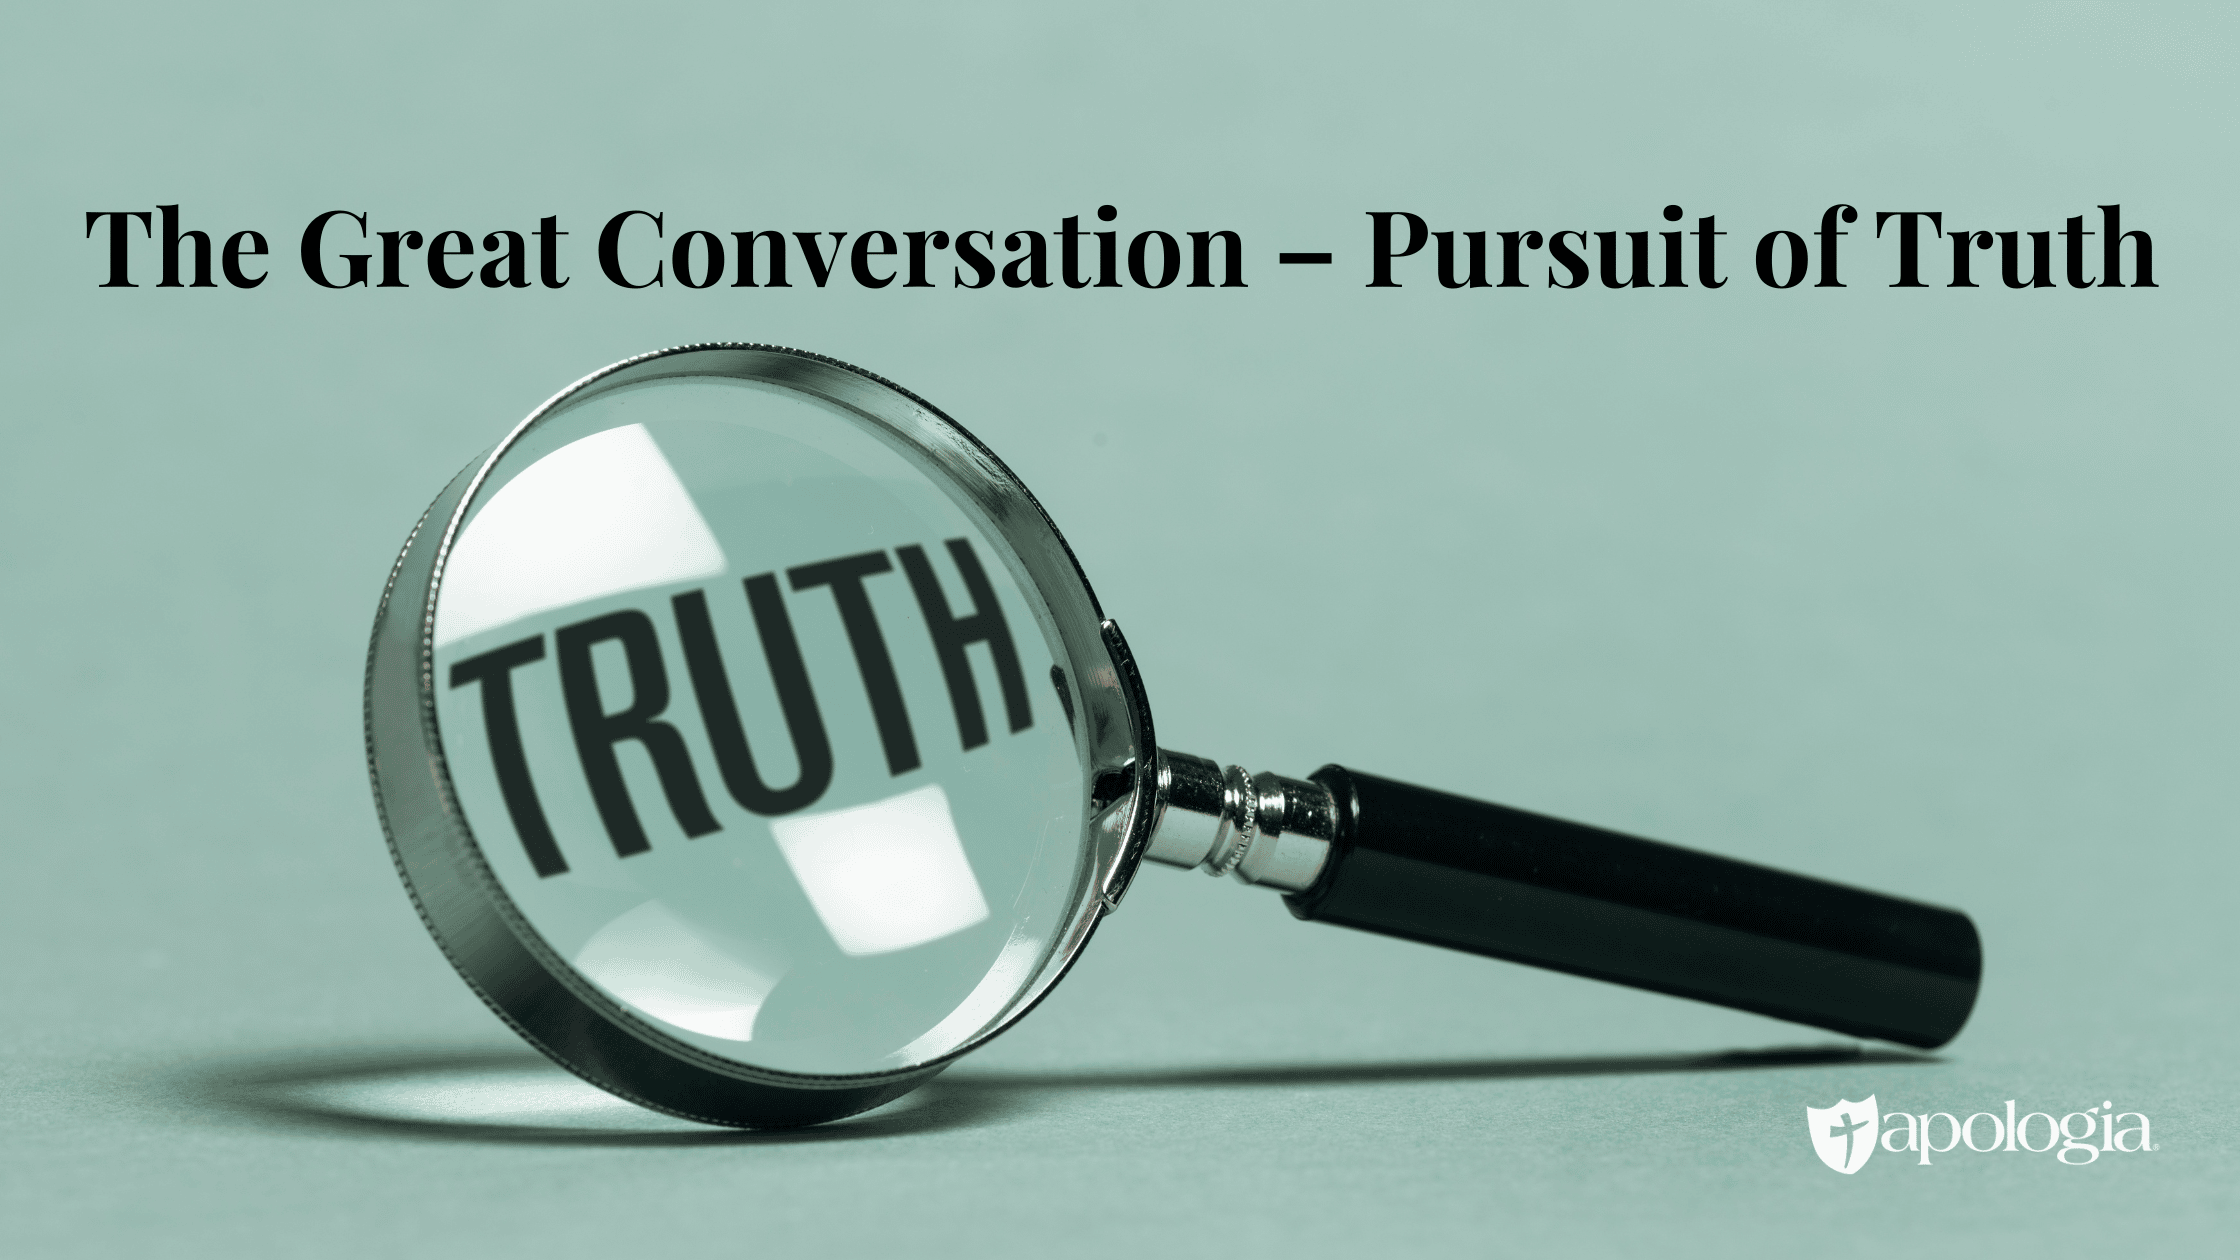 The Great Conversation – Pursuit of Truth